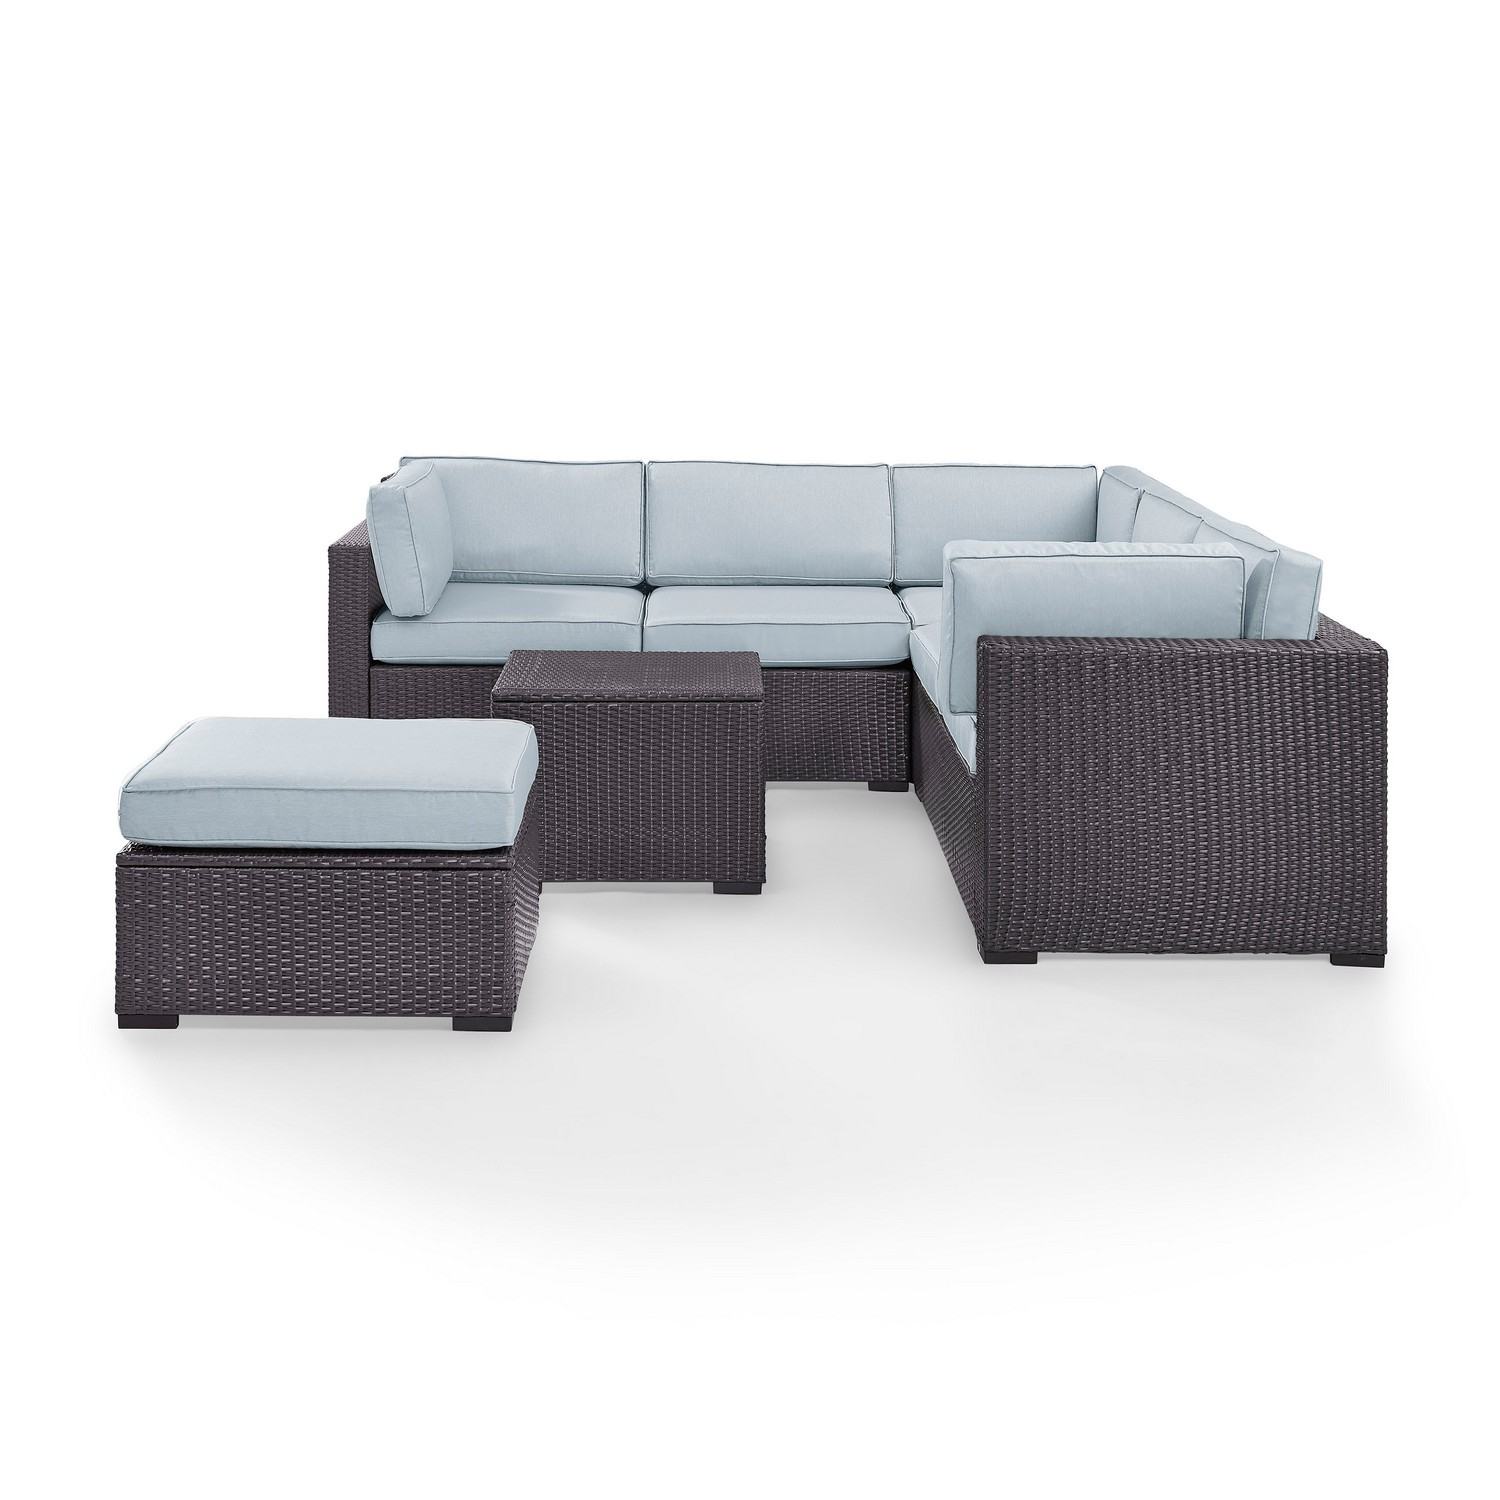 Crosley Biscayne 5-PC Outdoor Wicker Sectional Set - 2 Loveseats, Corner Chair, Coffee Table, Ottoman - Mist/Brown